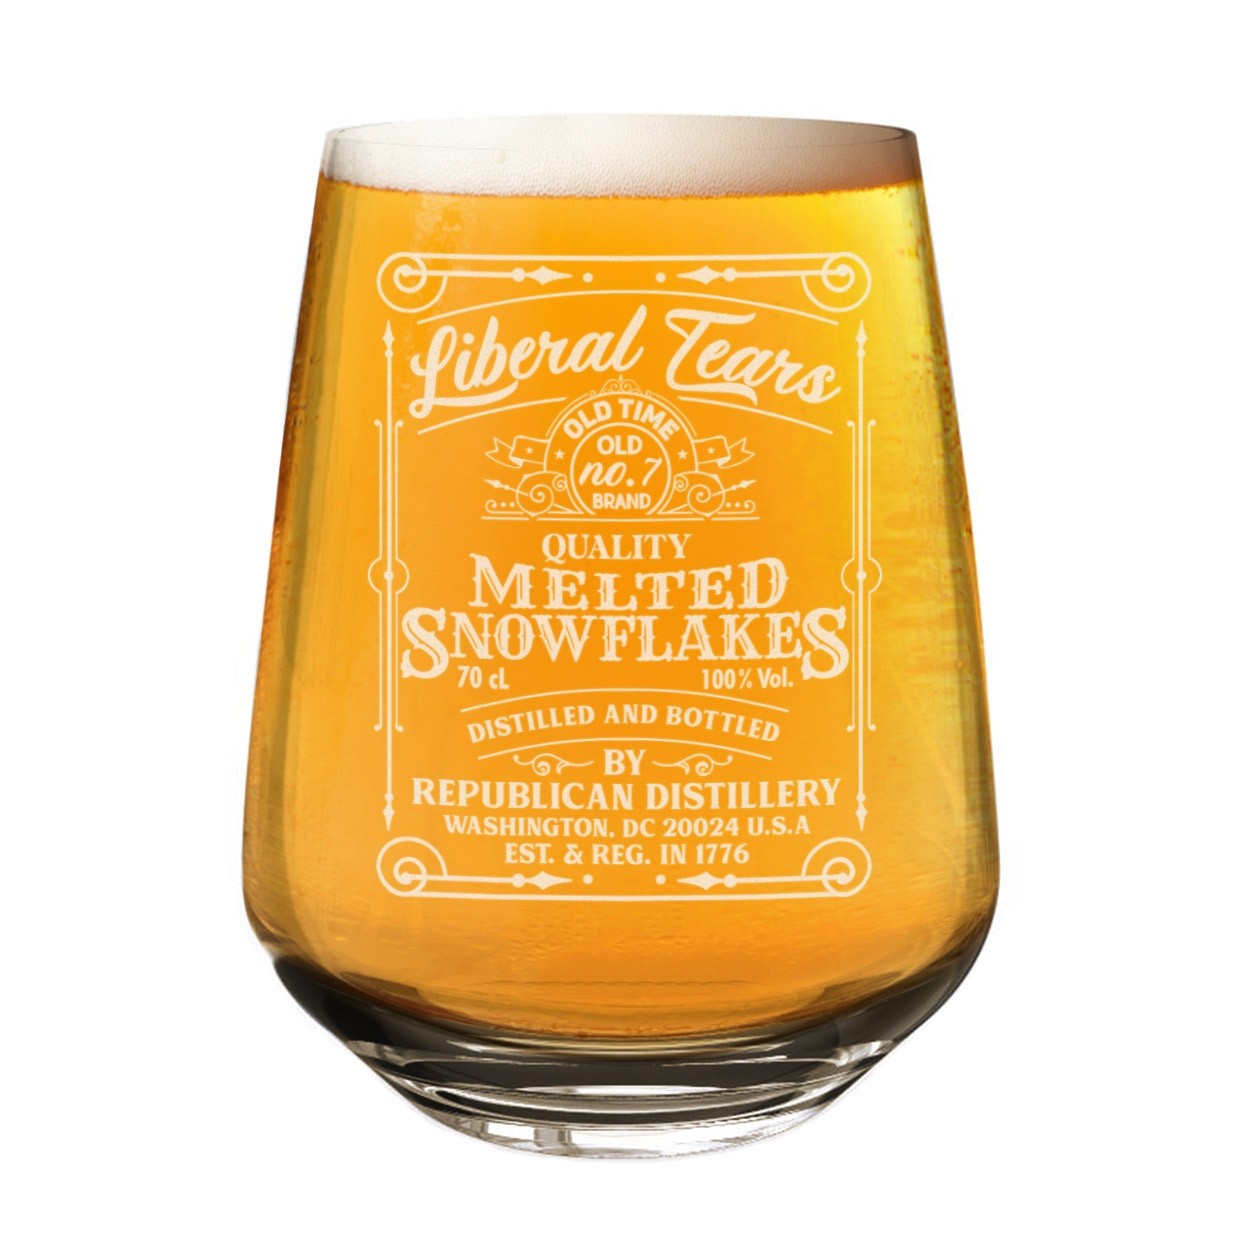 Liberal Tears Distillery 2/3 Pint Glass Craft Beer Cider Wine Gin Melted Snowflakes MAGA Funny Joke 2024 Trump